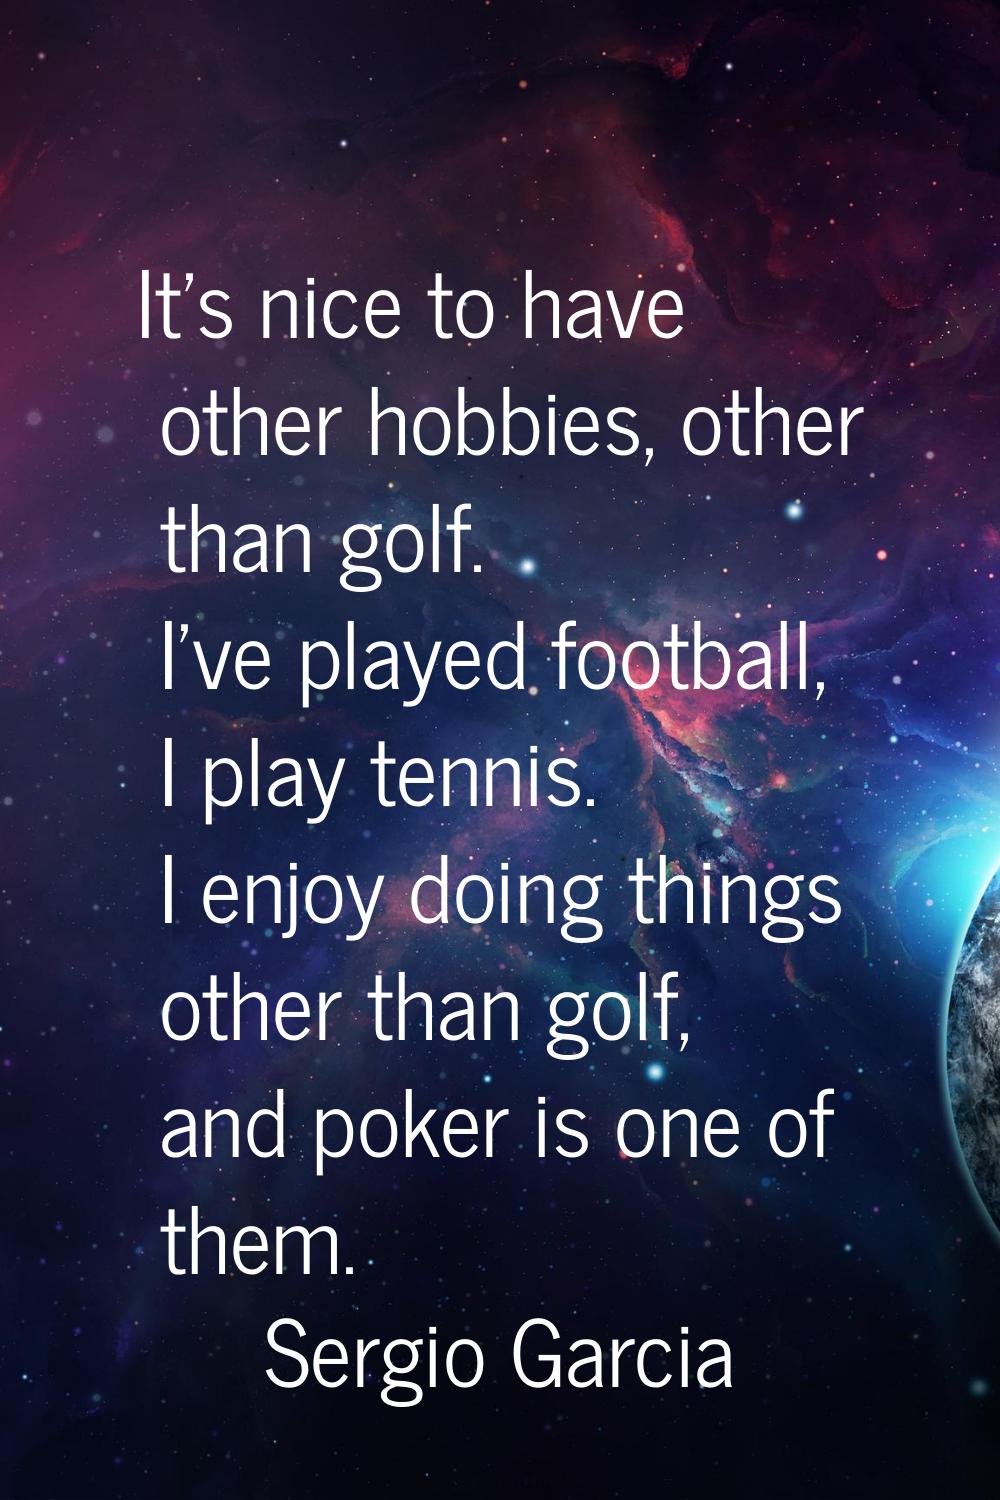 It's nice to have other hobbies, other than golf. I've played football, I play tennis. I enjoy doin